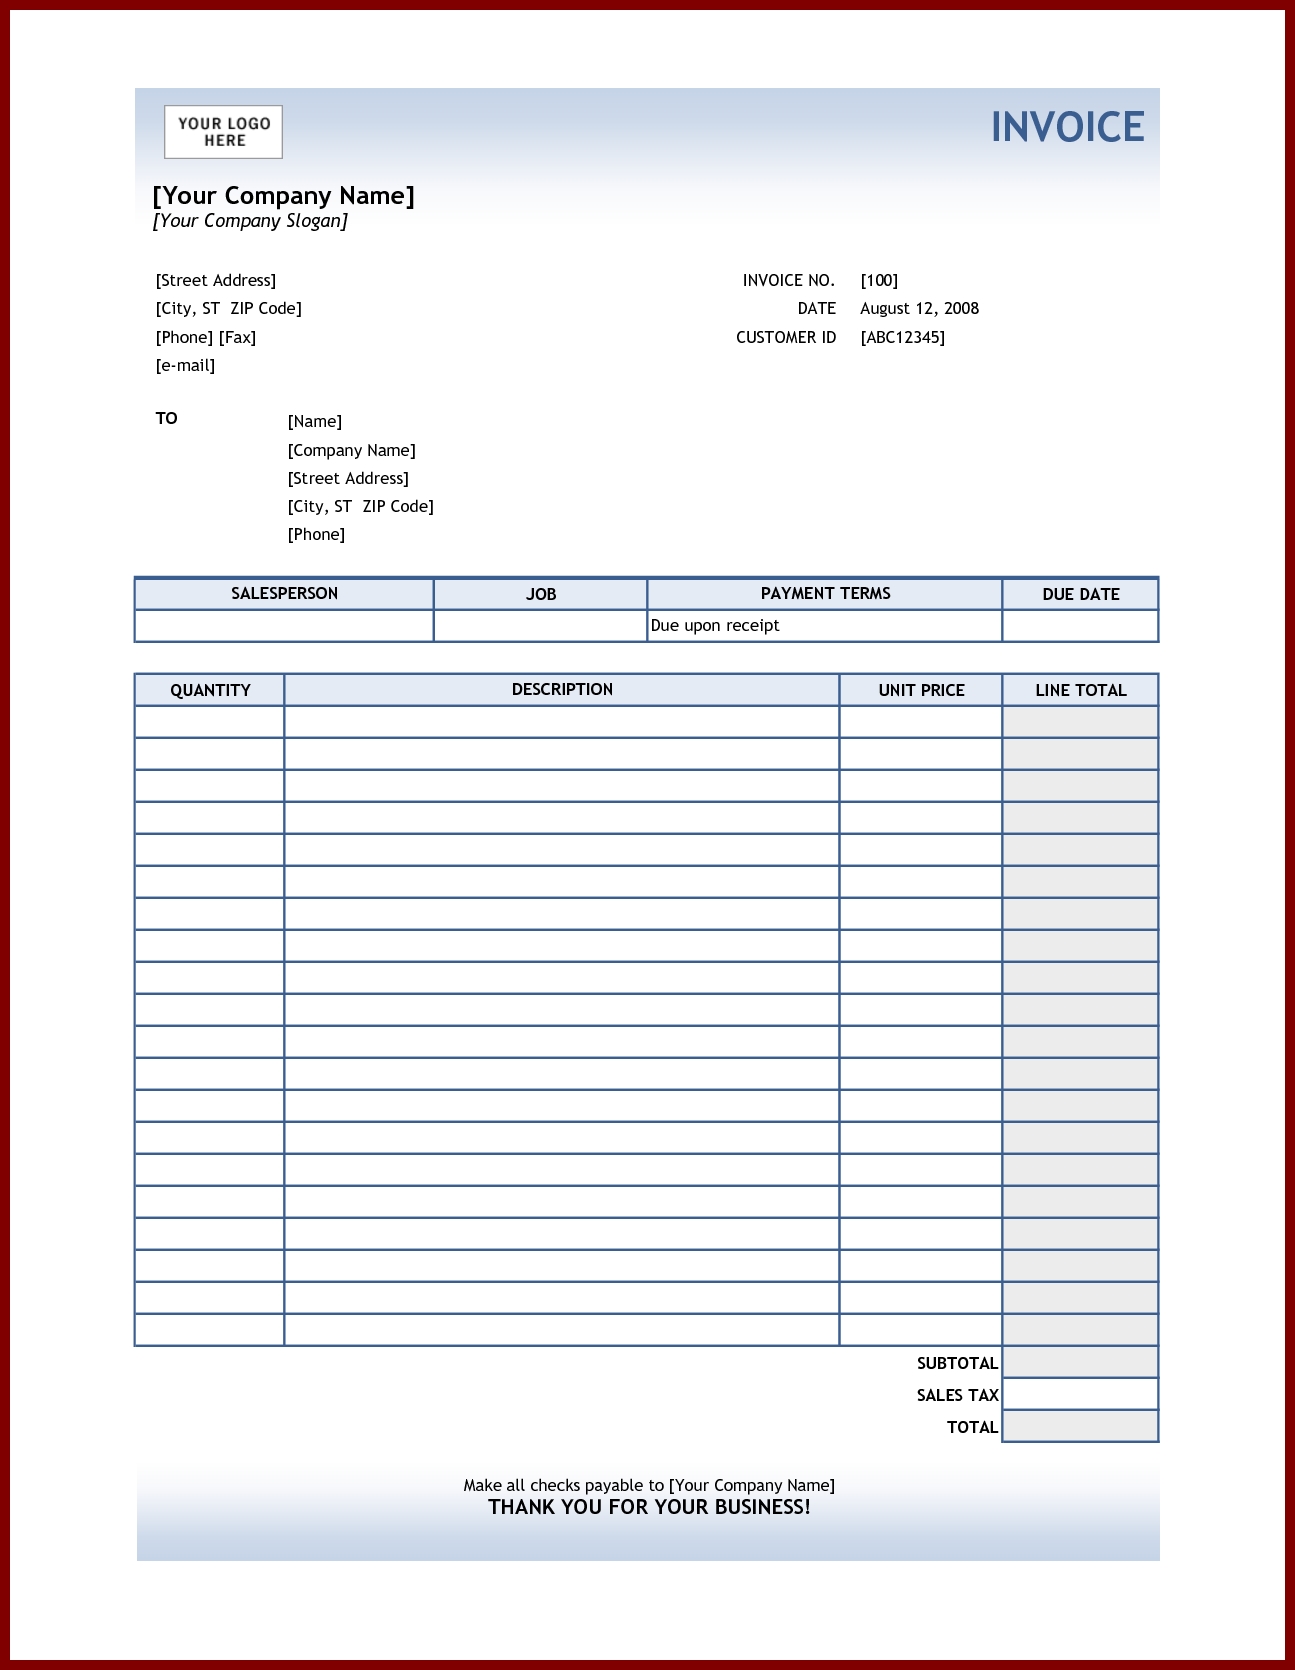 invoices-in-excel-invoice-template-ideas